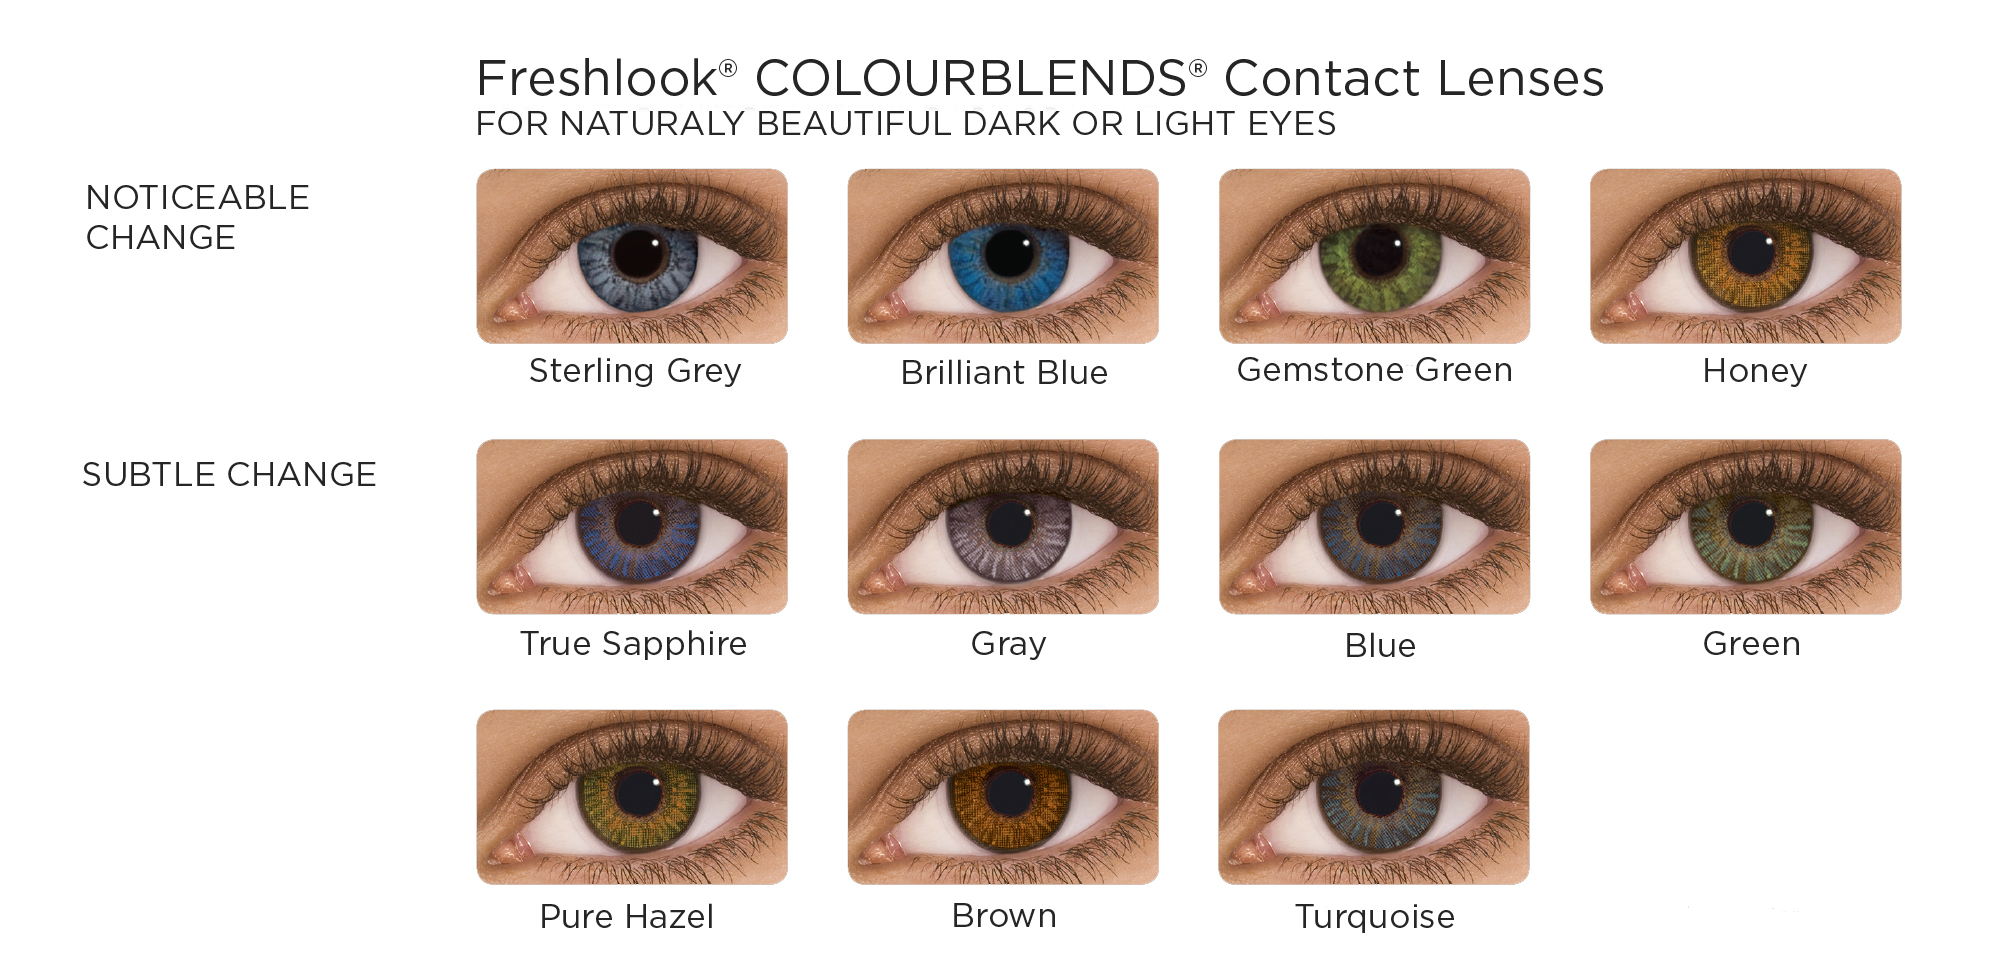 Freshlook Colorblends Contact Lenses 6 Pack Eyeq